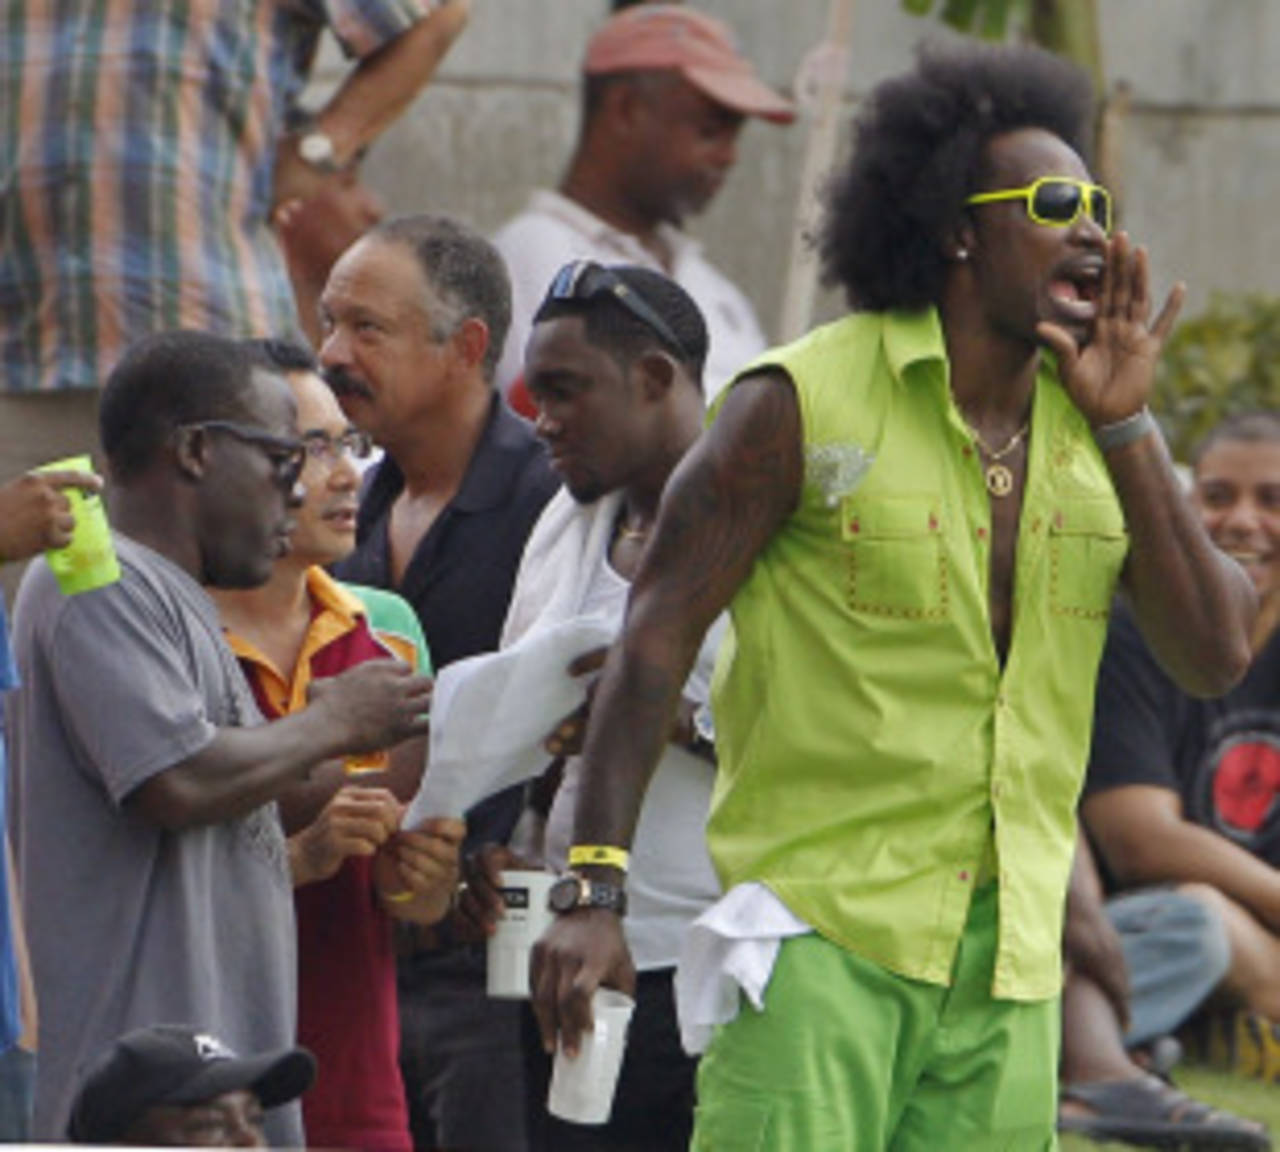 Chris Gayle shows off his flamboyant new hairstyle, West Indies v India, 5th ODI, Kingston, Jamaica, June 16, 2011